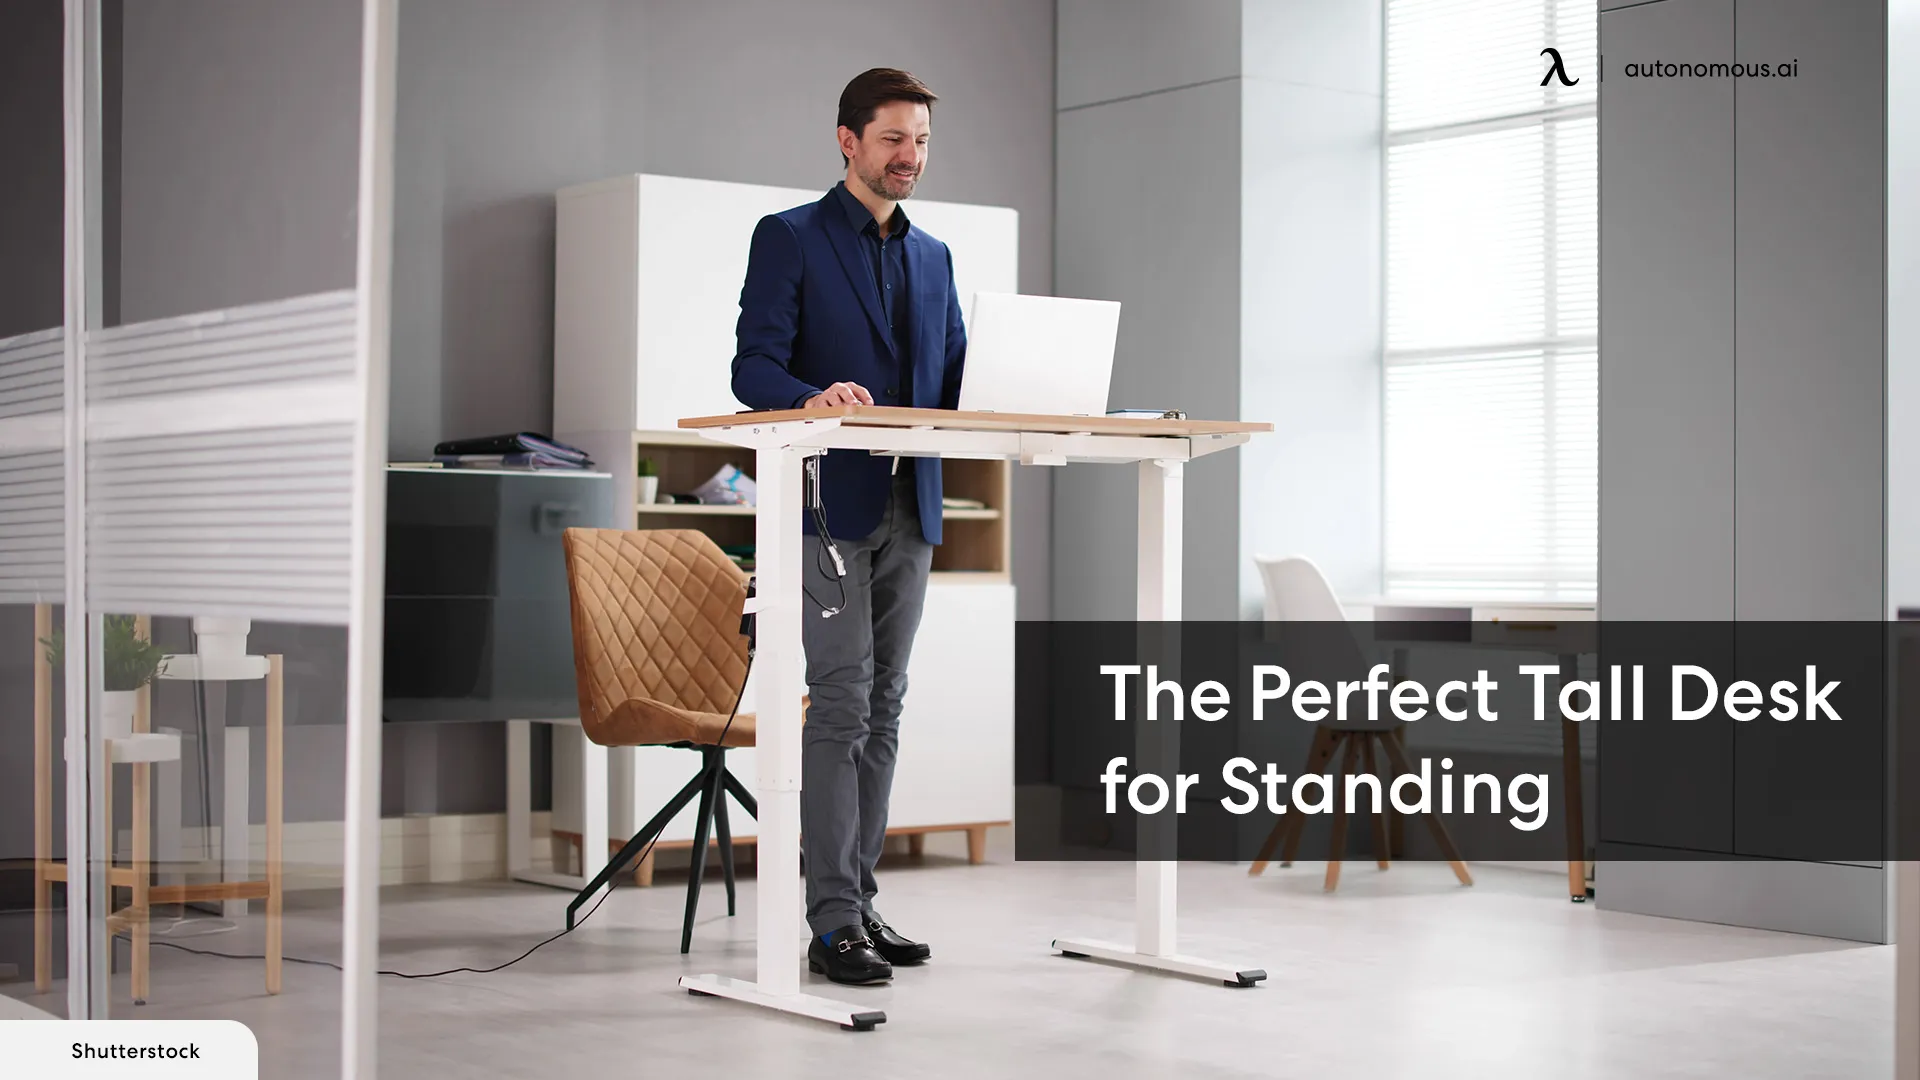 Types of People Who Will Benefit From a Tall Desk for Standing